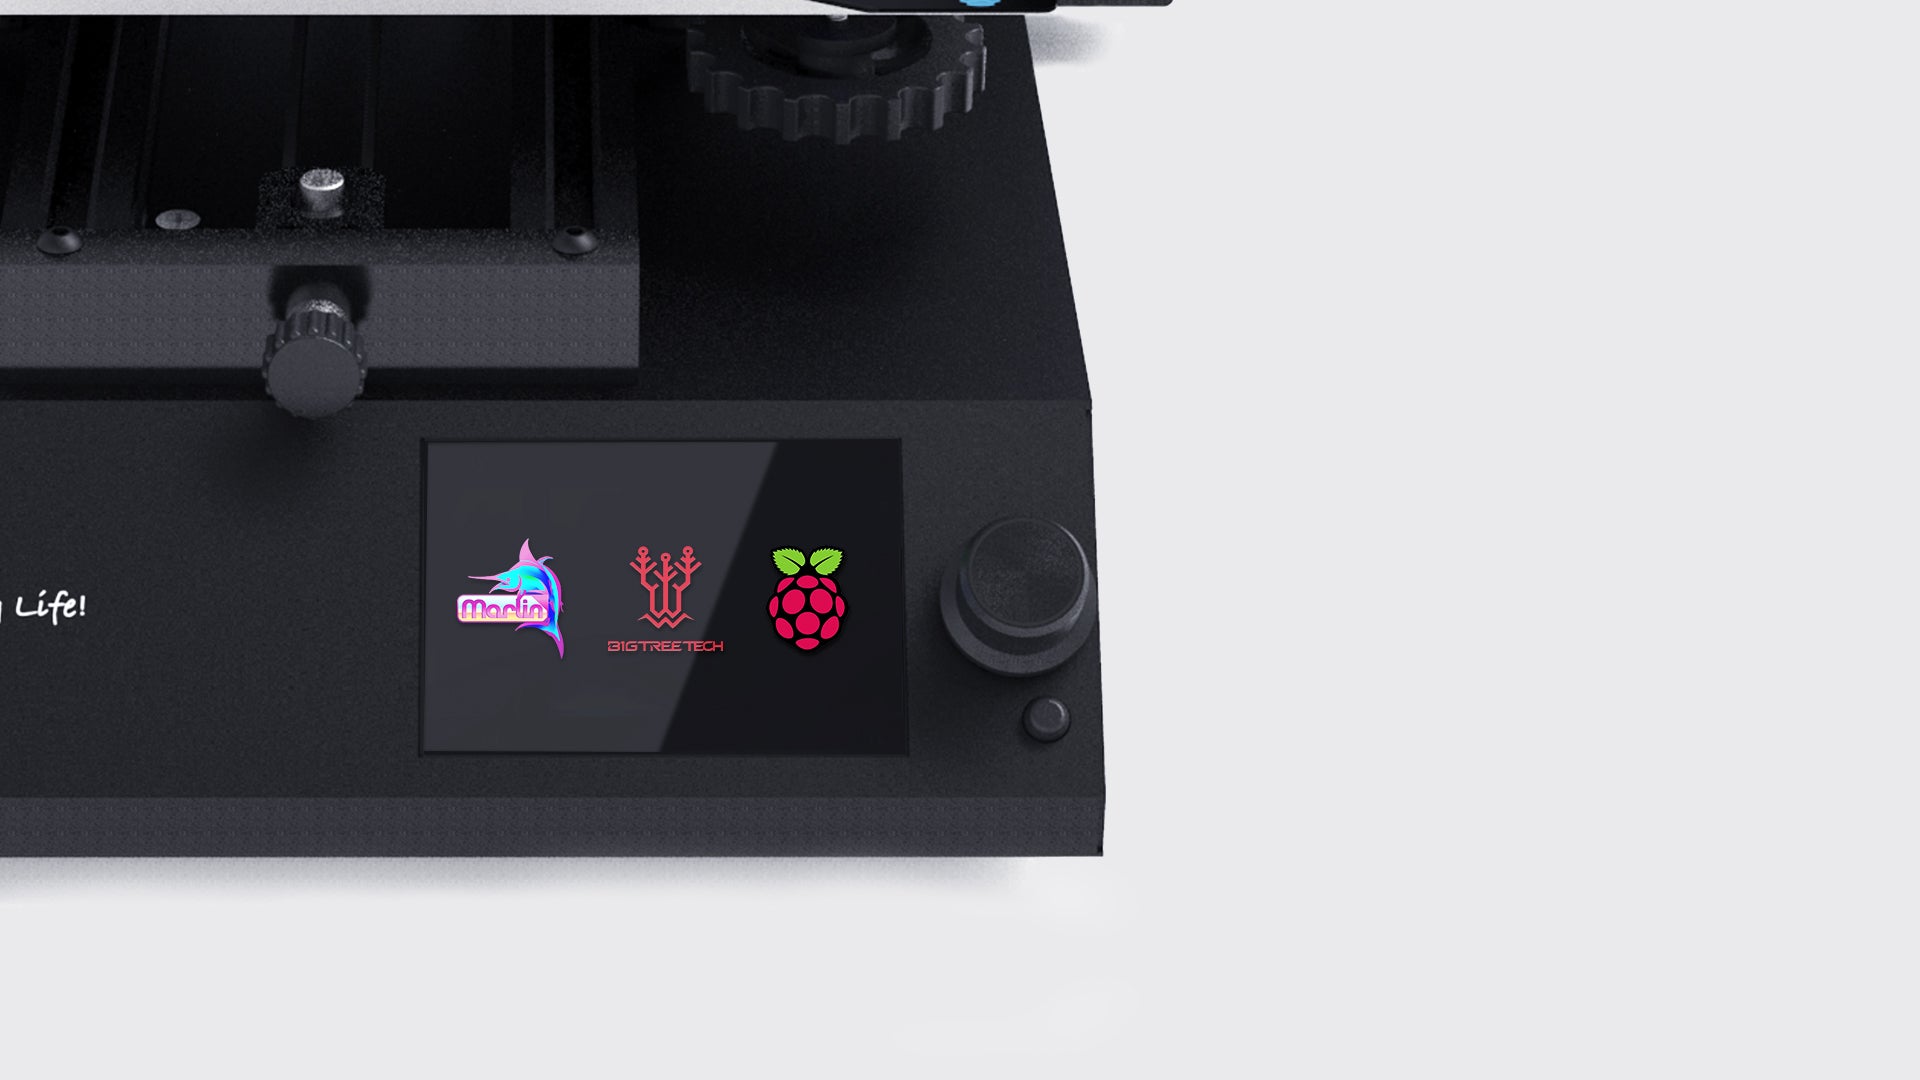 How to Use a 3D Printer (FDM) Two methods to print it. One is to use an SD card or USB flash disk. Another way is remote printing, which can be realized by the Raspberry Pi. BIQU 3D Printing